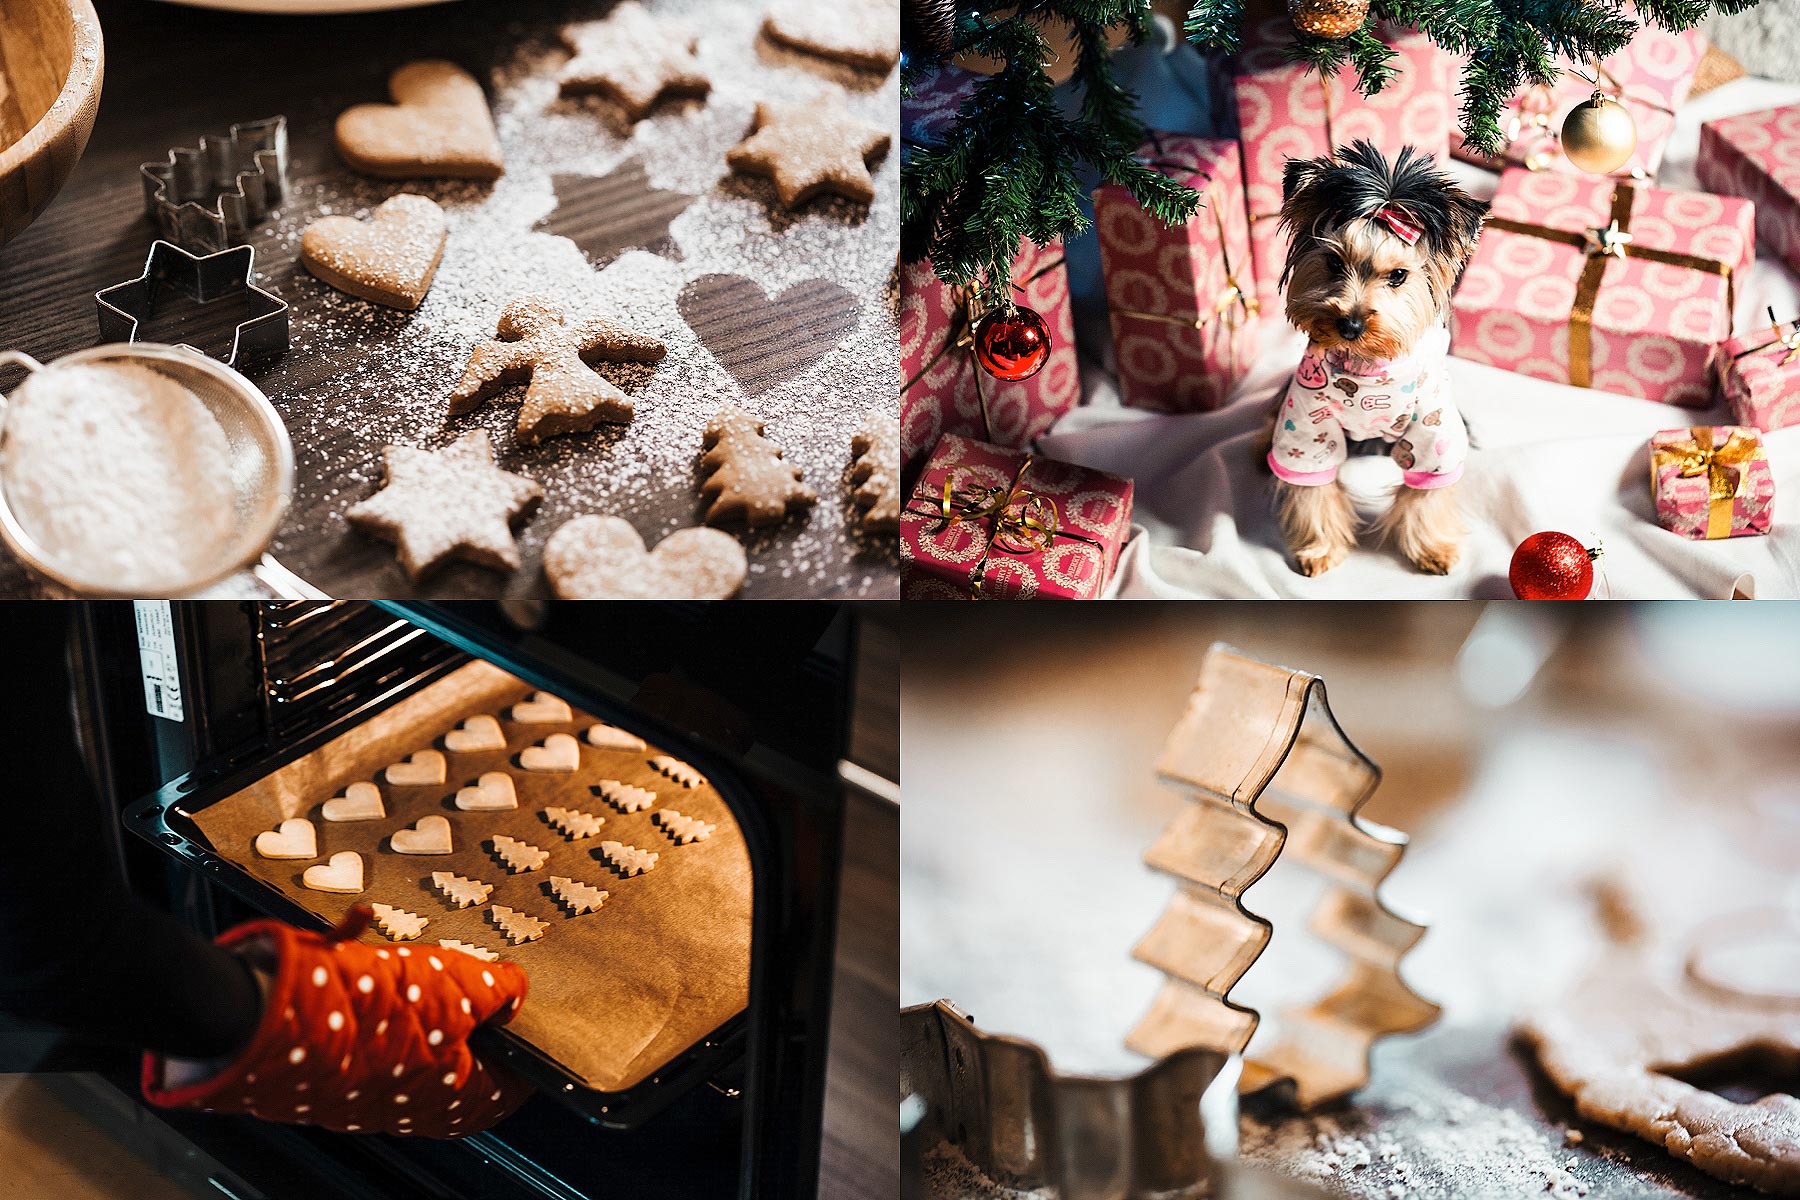 96 hi-res images of Christmas baking, Christmas gifts and decorations and Christmas table setting